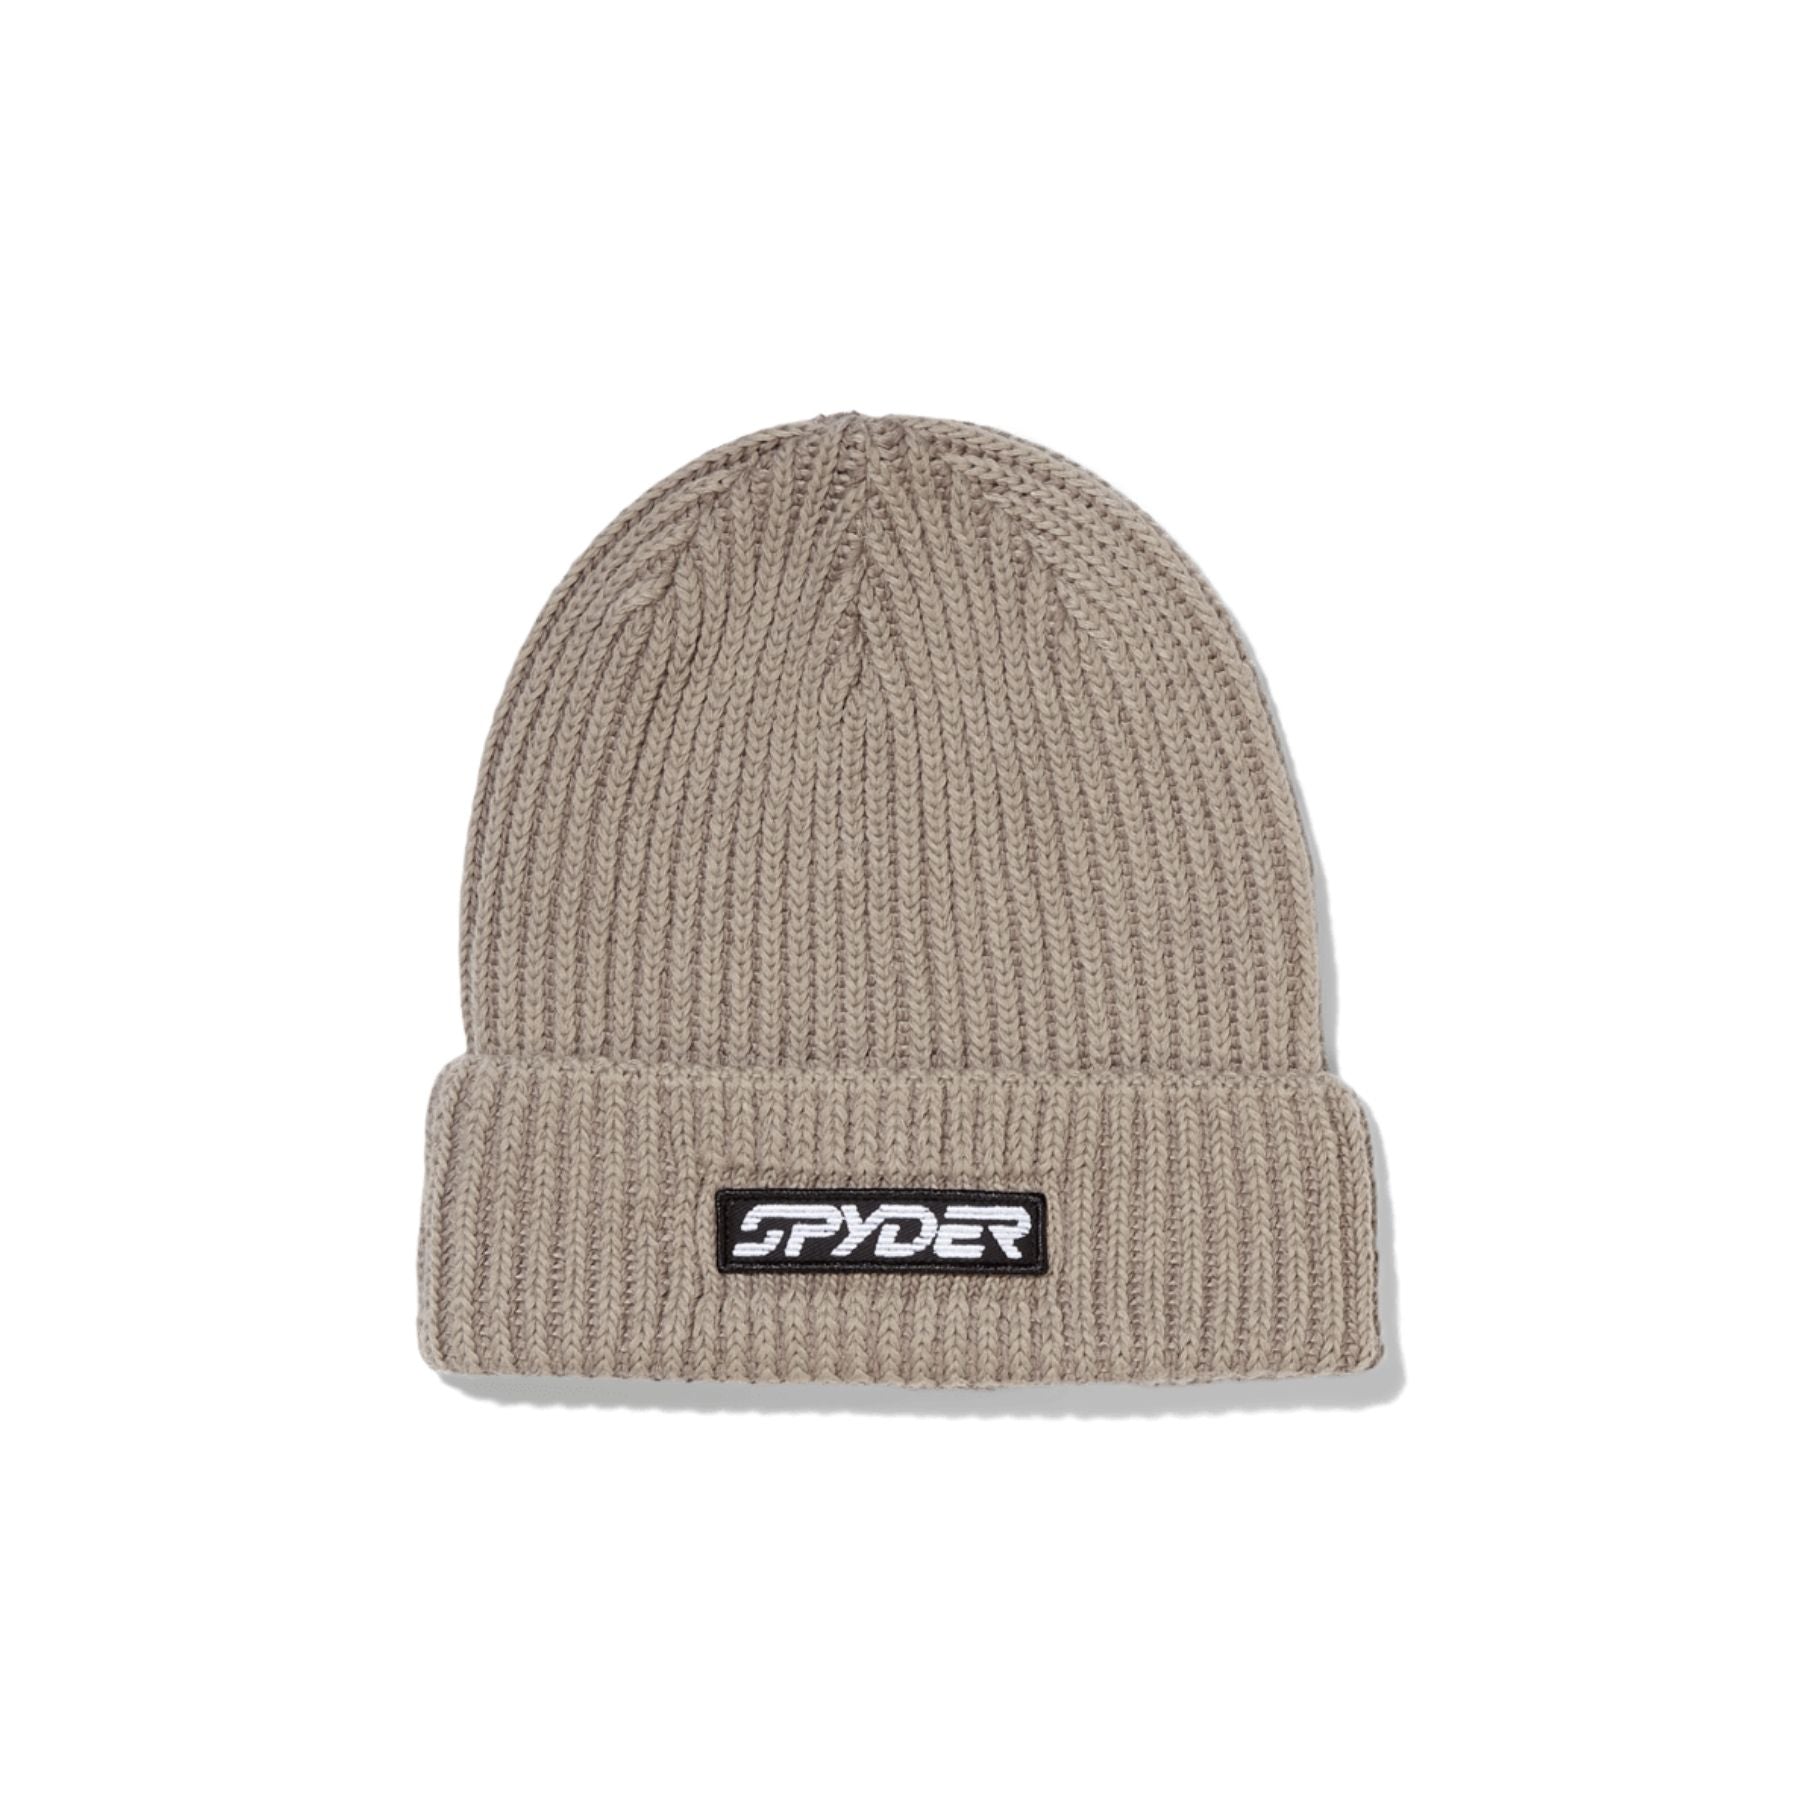 Spyder Groomers Hat in Desert Taupe